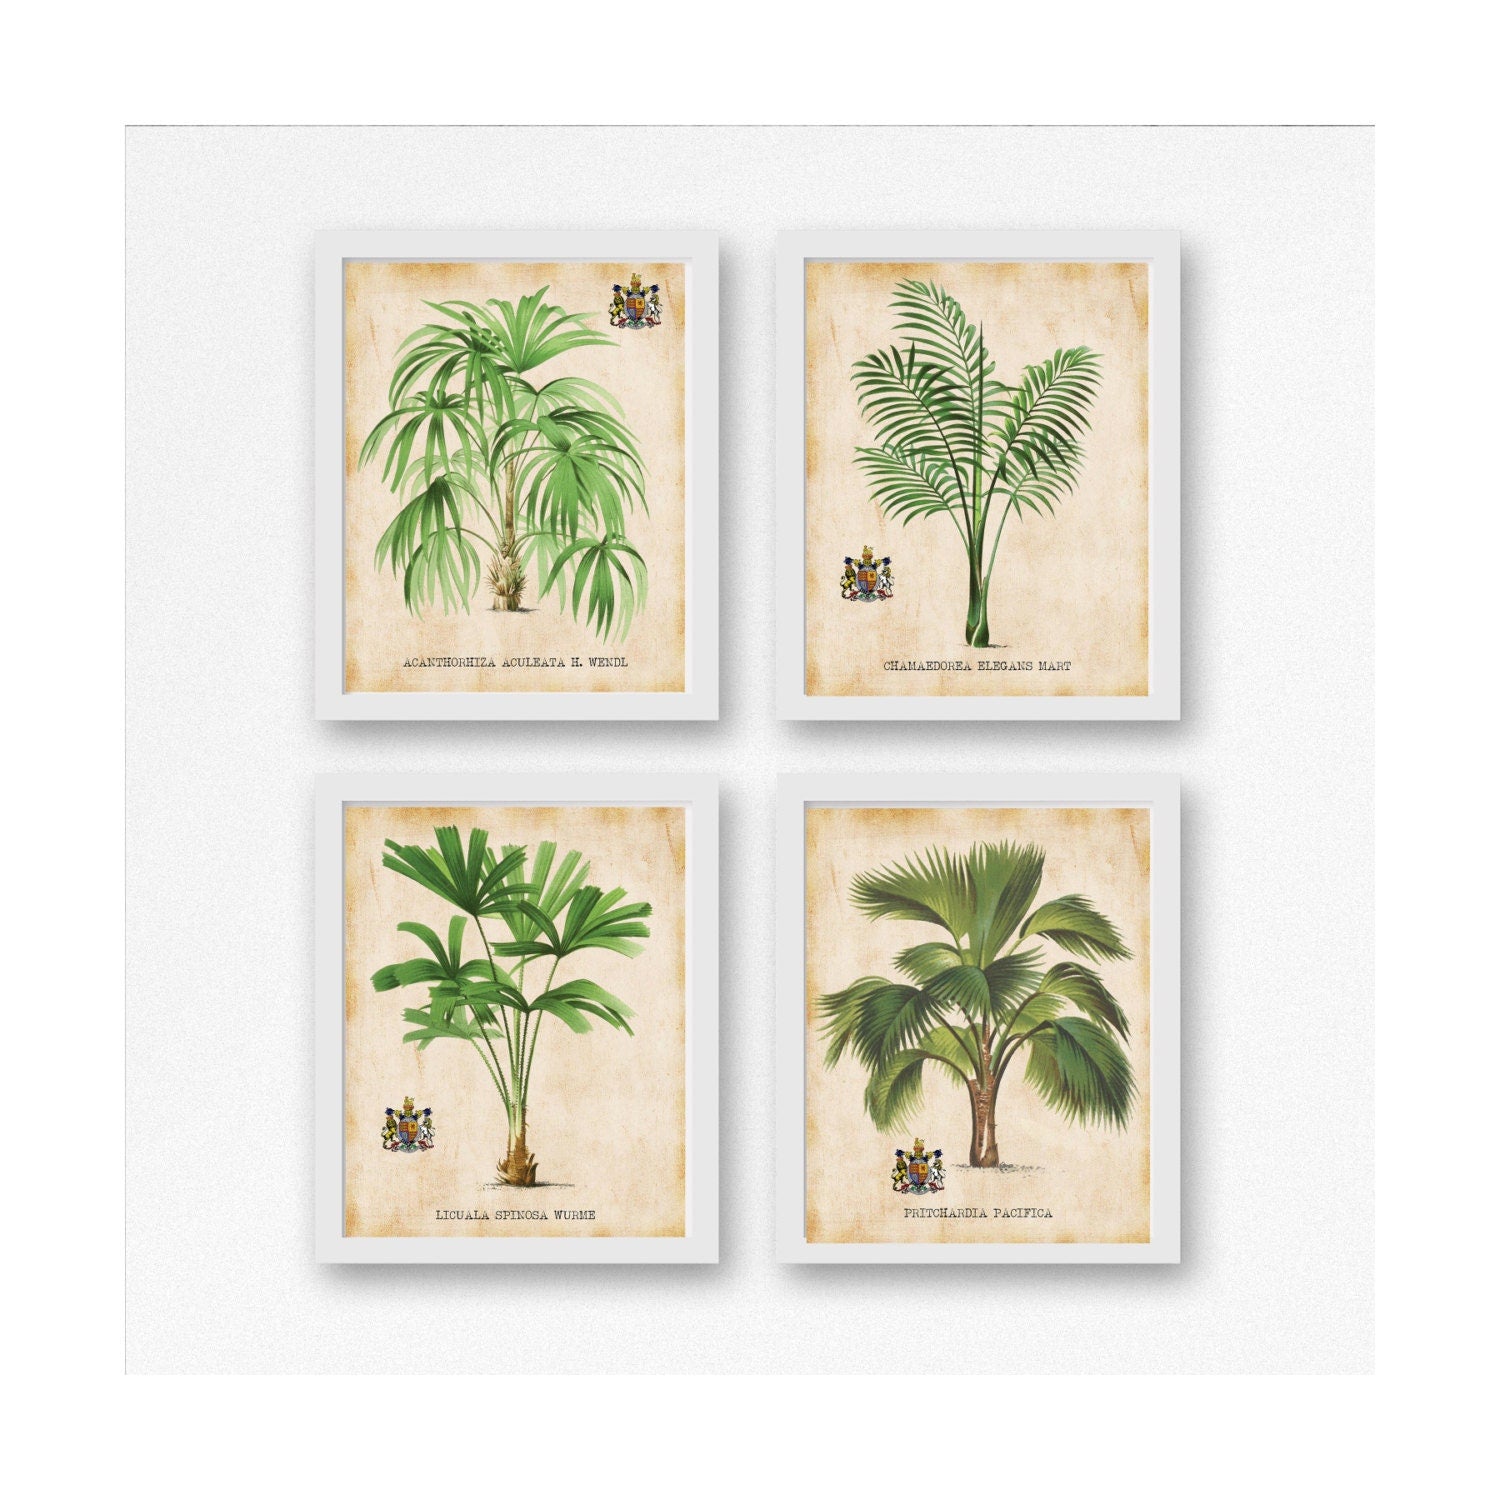 Tropical Palm Tree Art Prints Set For You To Print 7.5" x 9.5"  For Matting Antique Palms Wall Decor Botanical Print Picture Instant